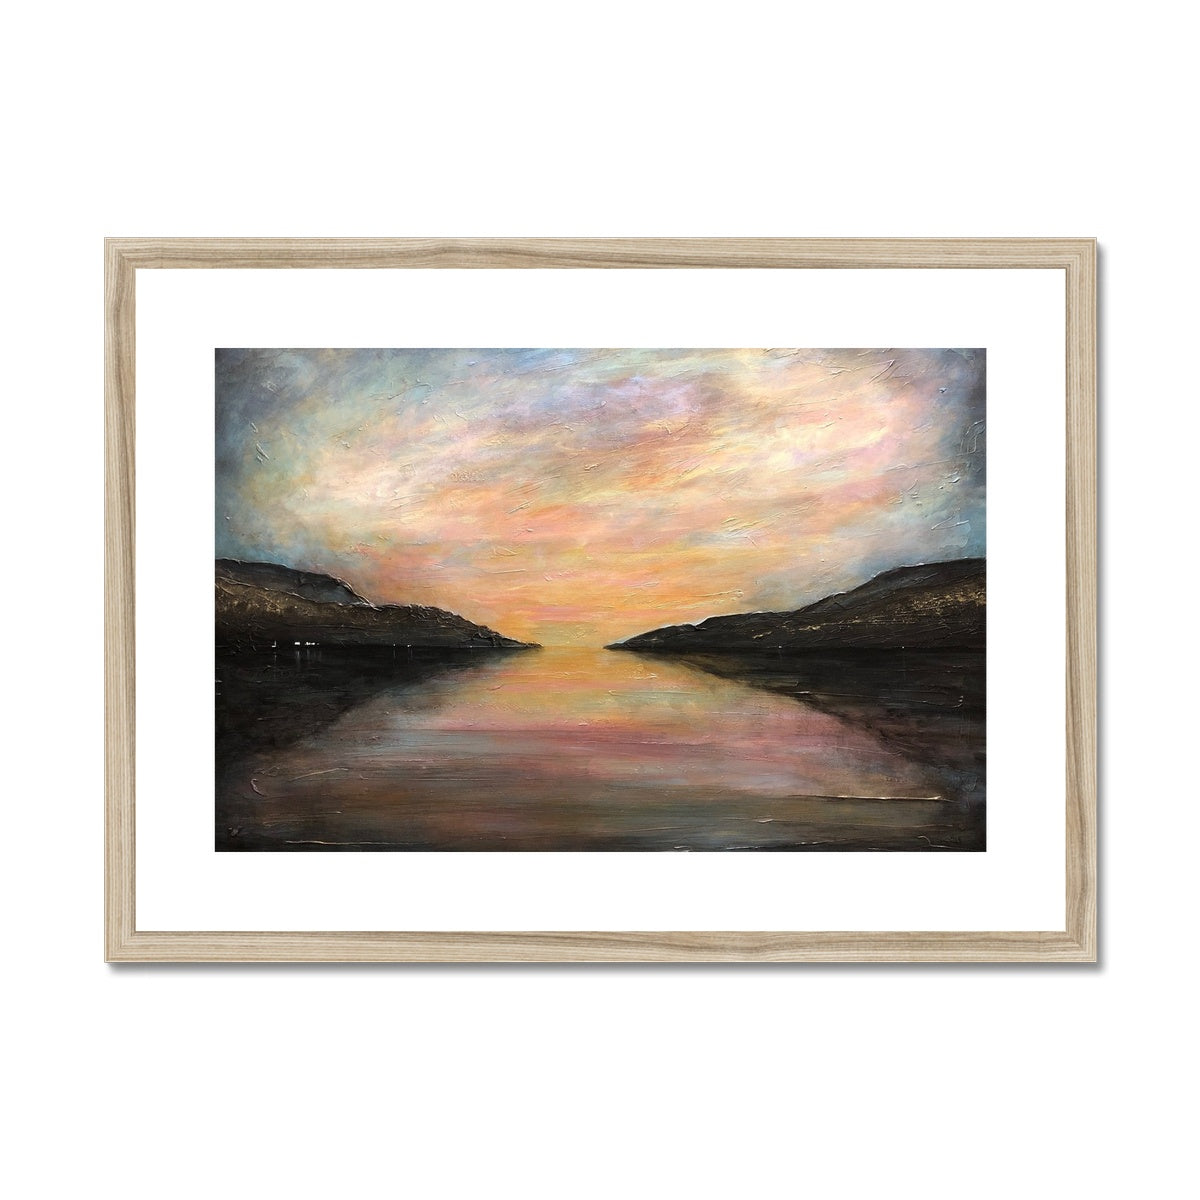 Loch Ness Glow Painting | Framed & Mounted Prints From Scotland-Framed & Mounted Prints-Scottish Lochs & Mountains Art Gallery-A2 Landscape-Natural Frame-Paintings, Prints, Homeware, Art Gifts From Scotland By Scottish Artist Kevin Hunter